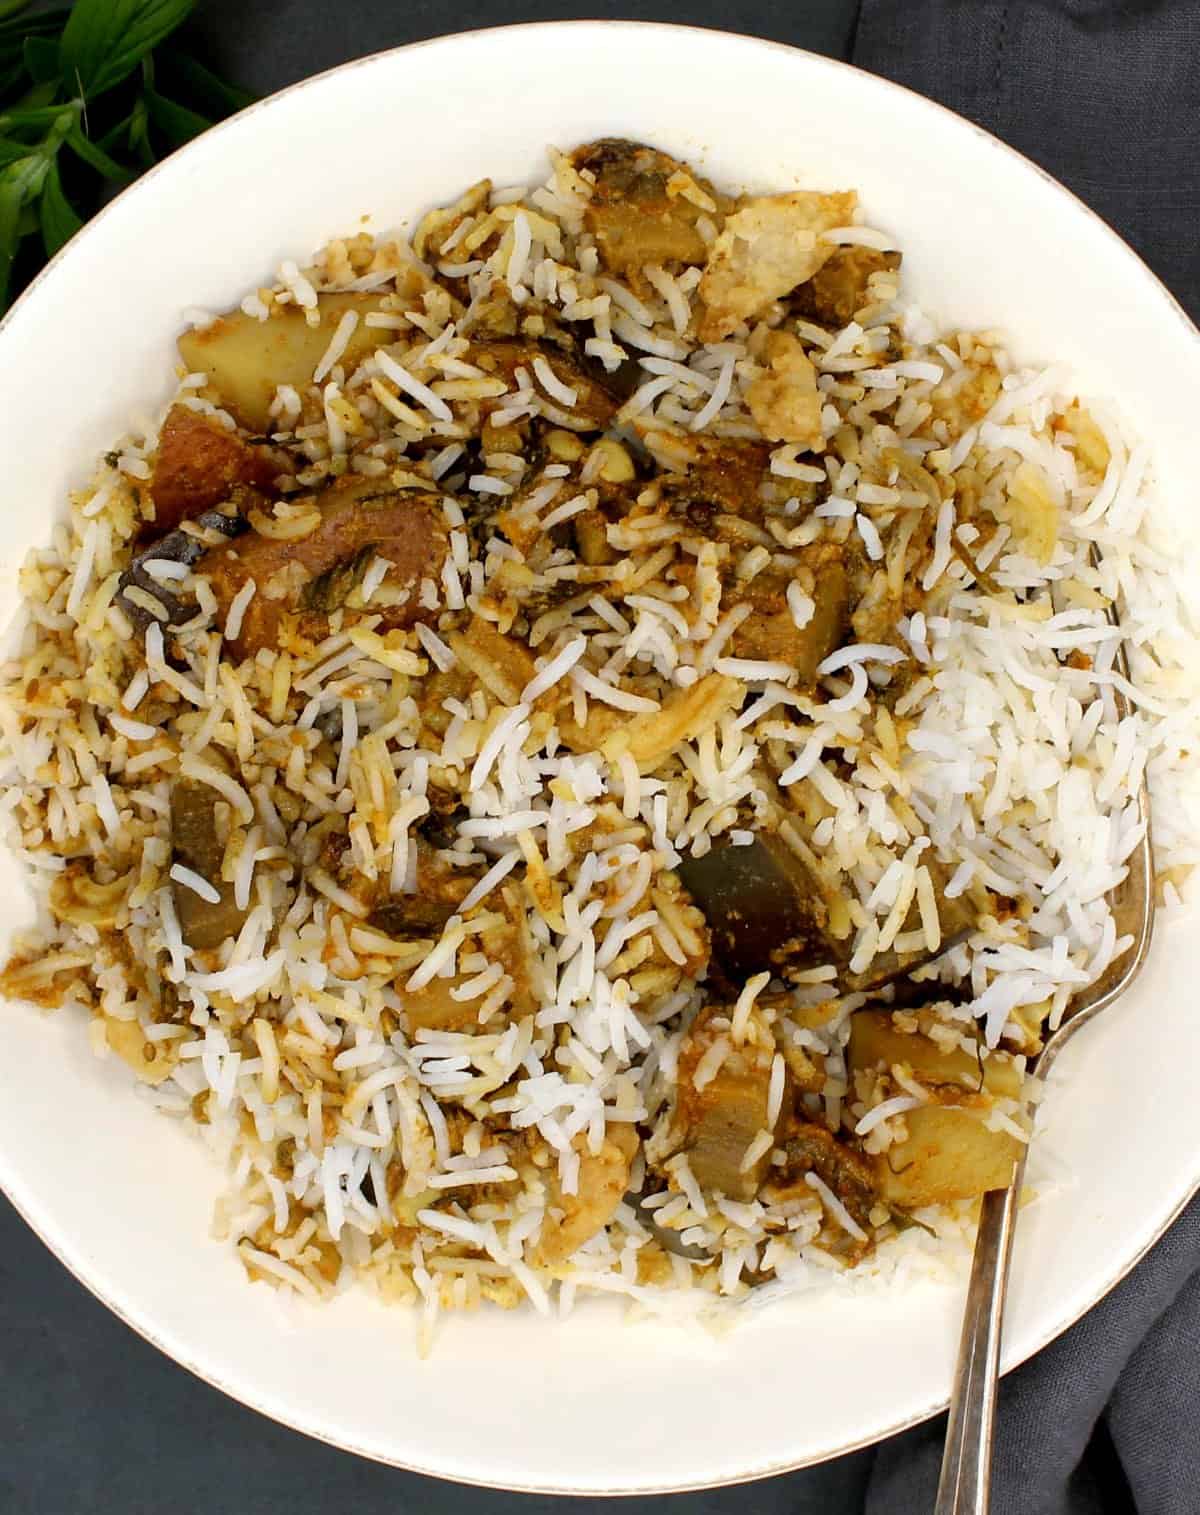 Eggplant biryani in a white bowl with chunks of eggplant, potatoes and a fork.